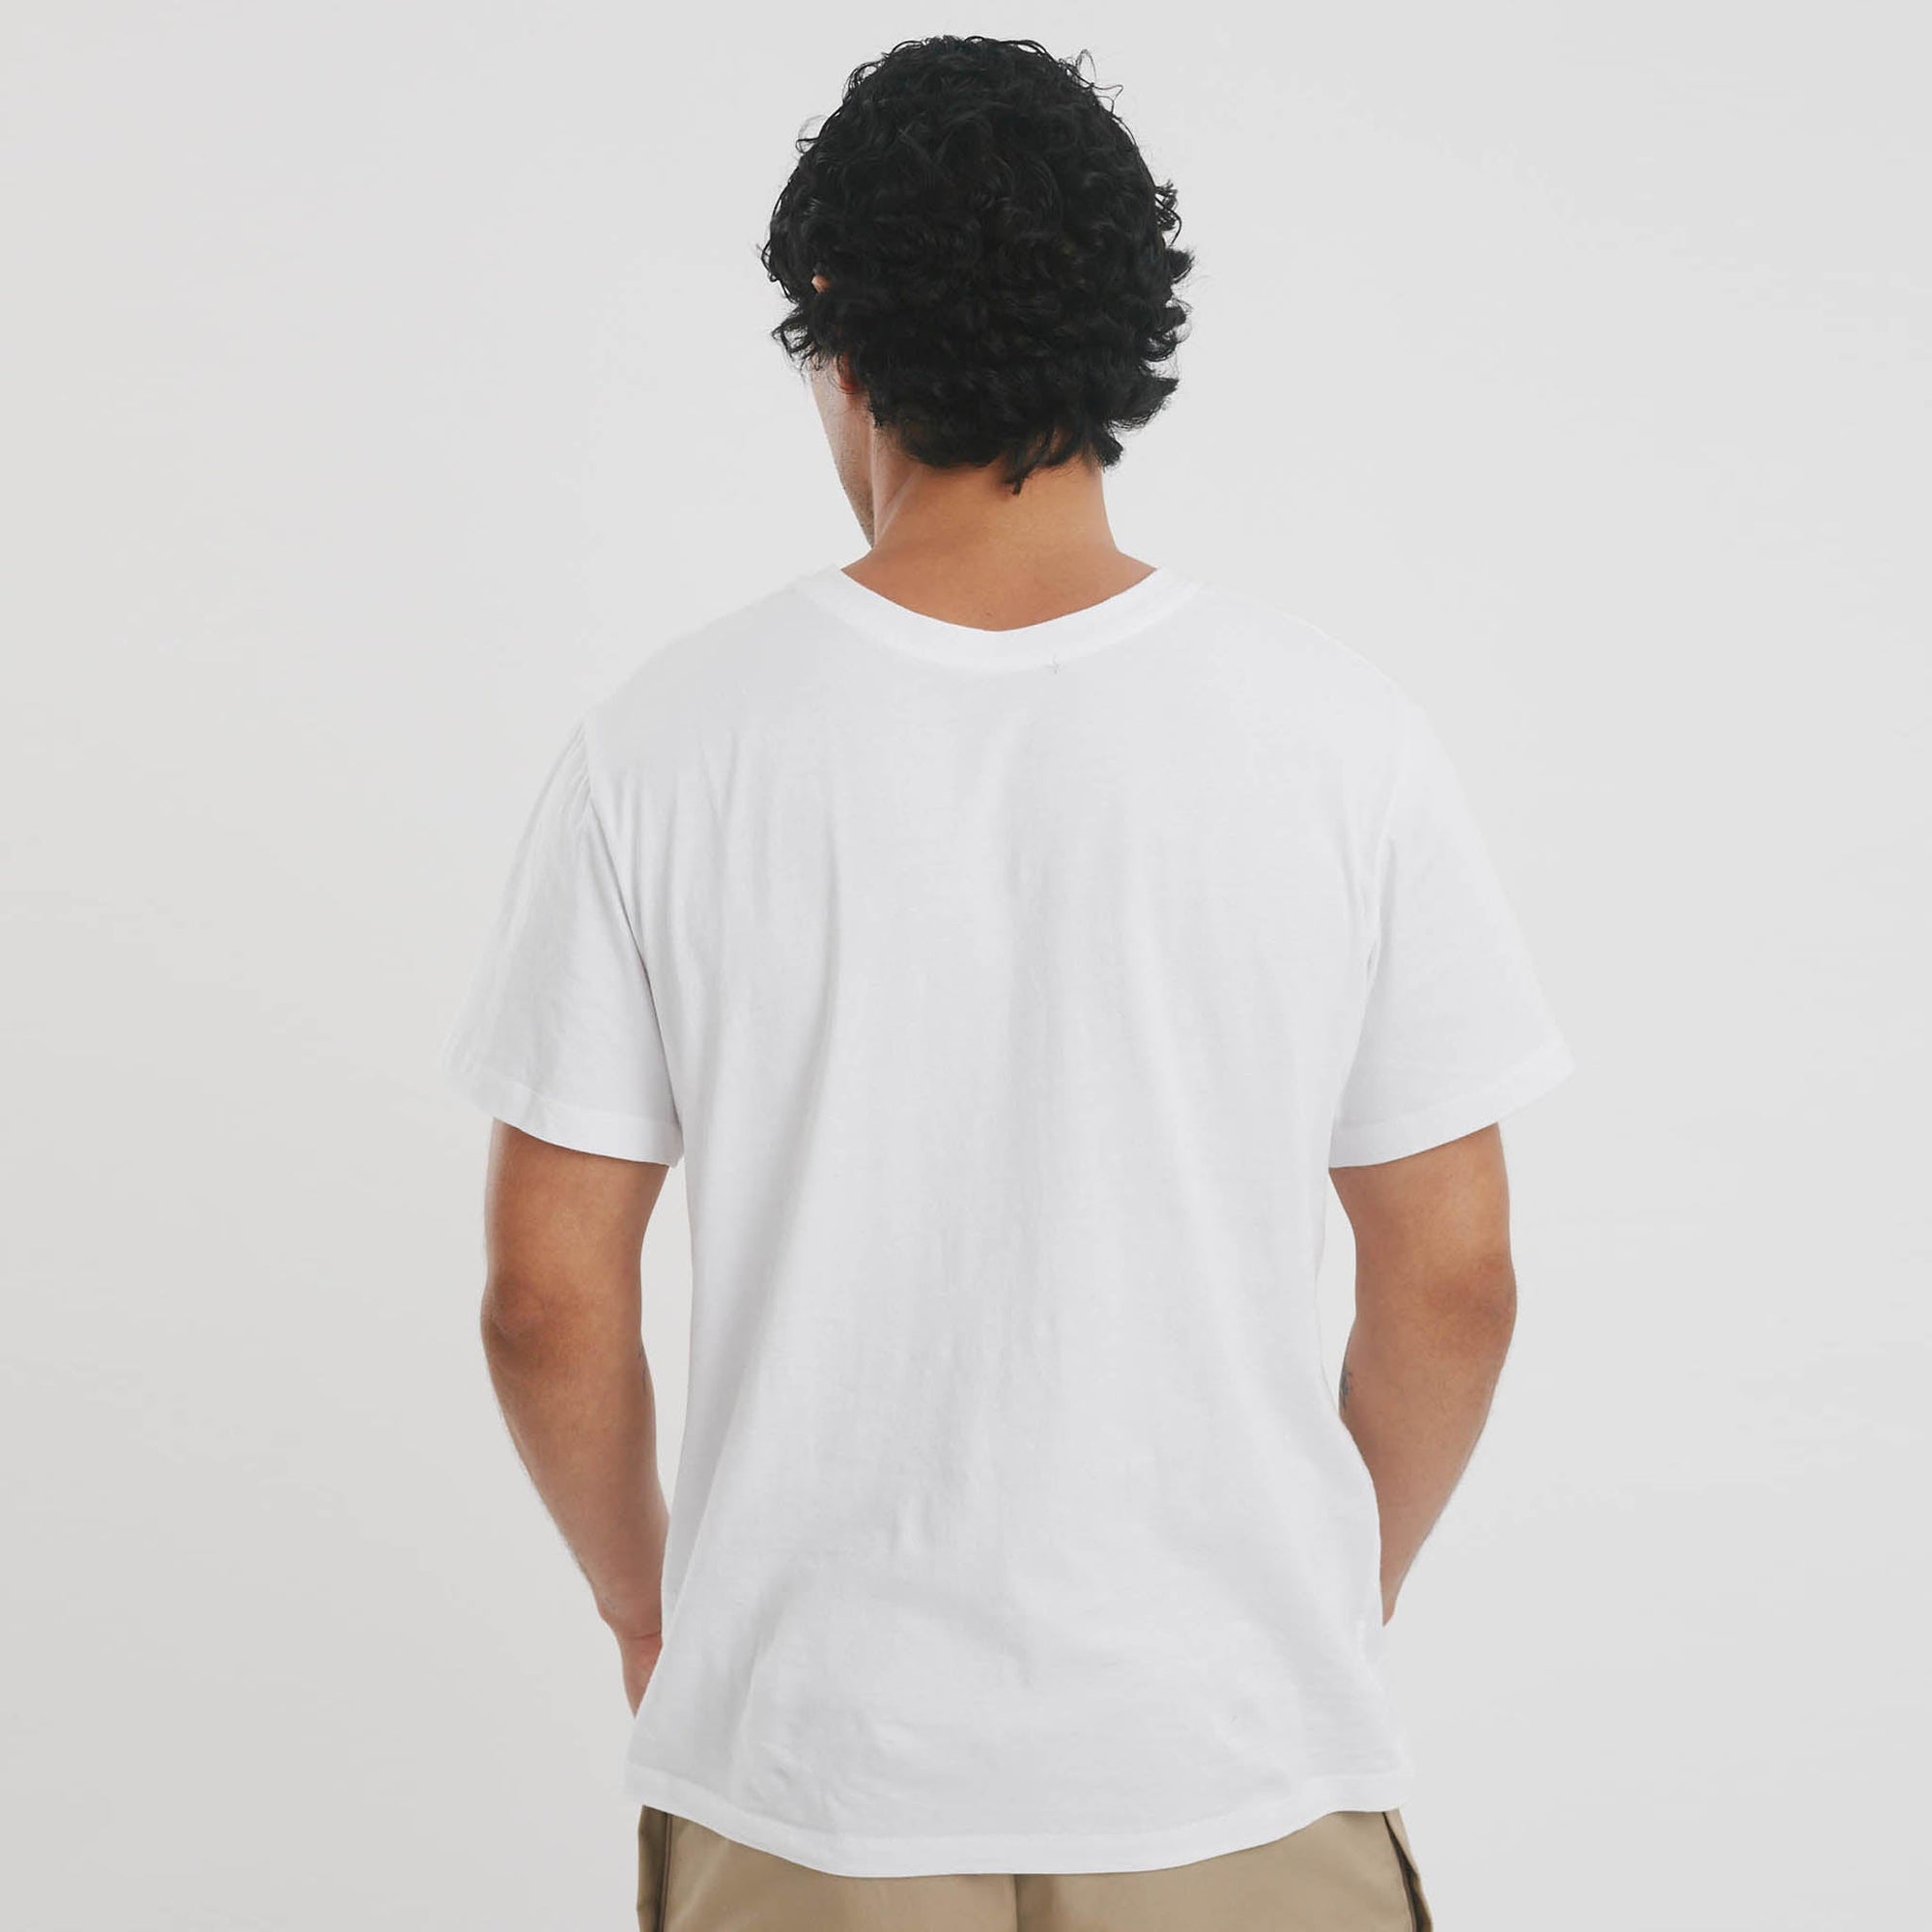 The Comfy T-Shirt-Mens. No tags, no lables. The Shapes United.